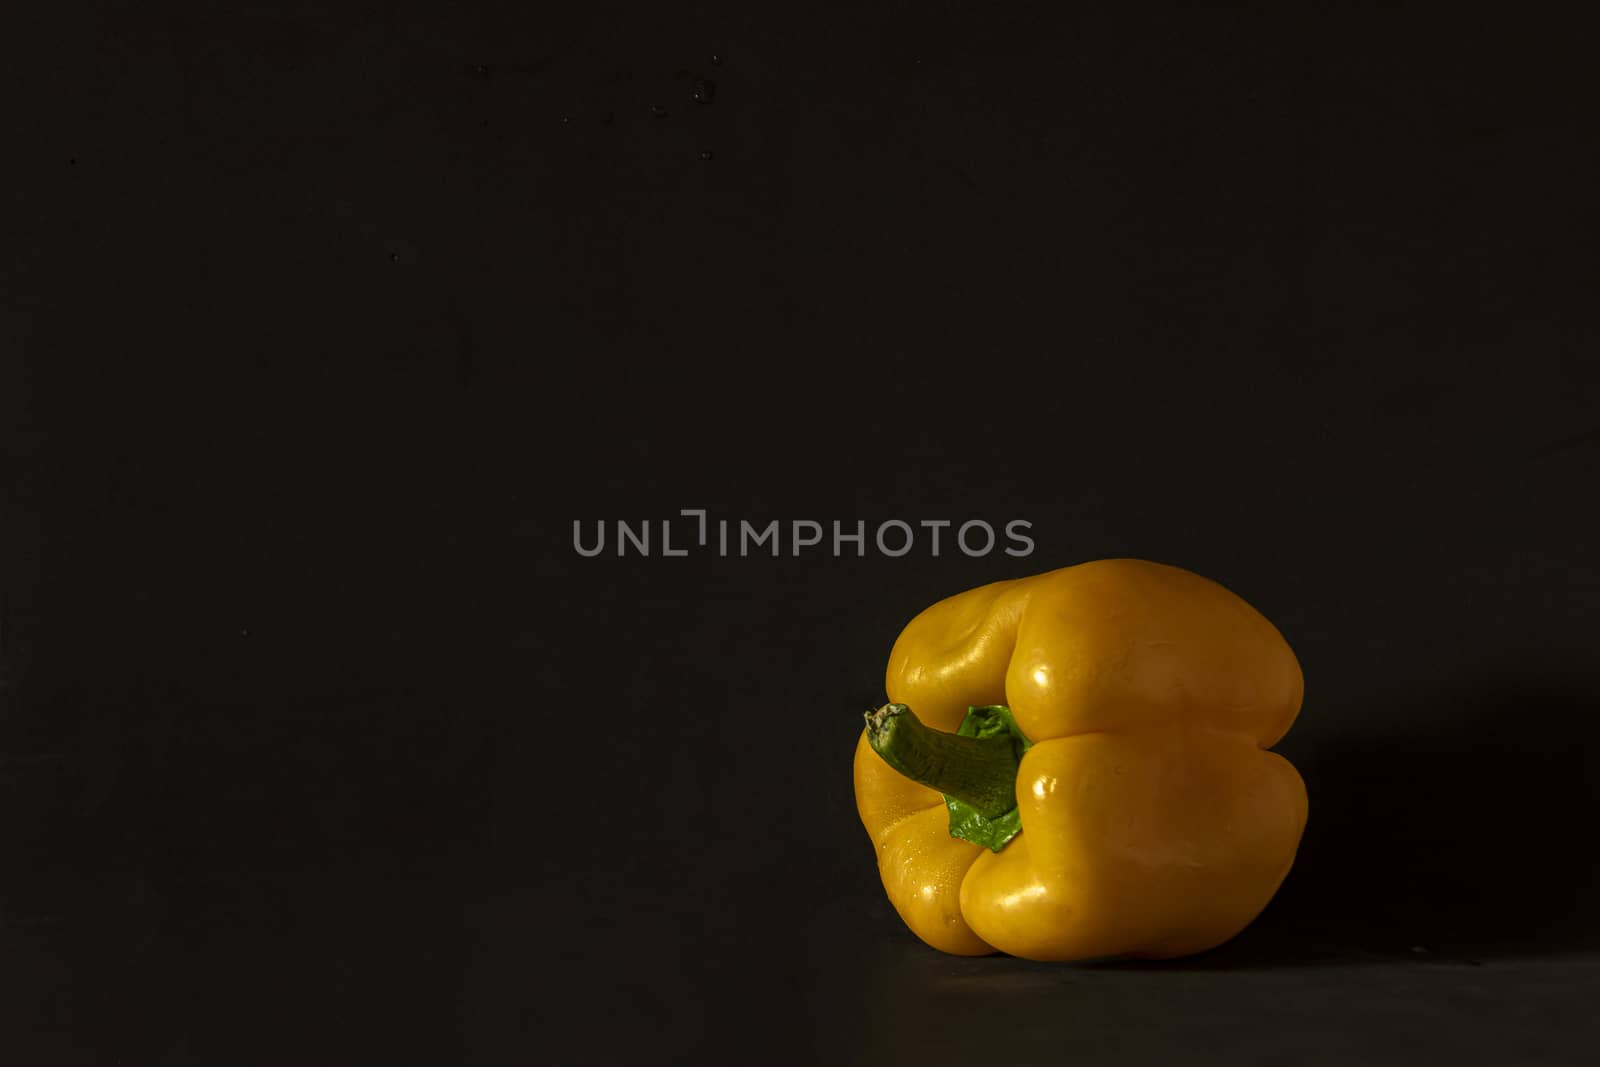 close-up of yellow pepper on a dark background.